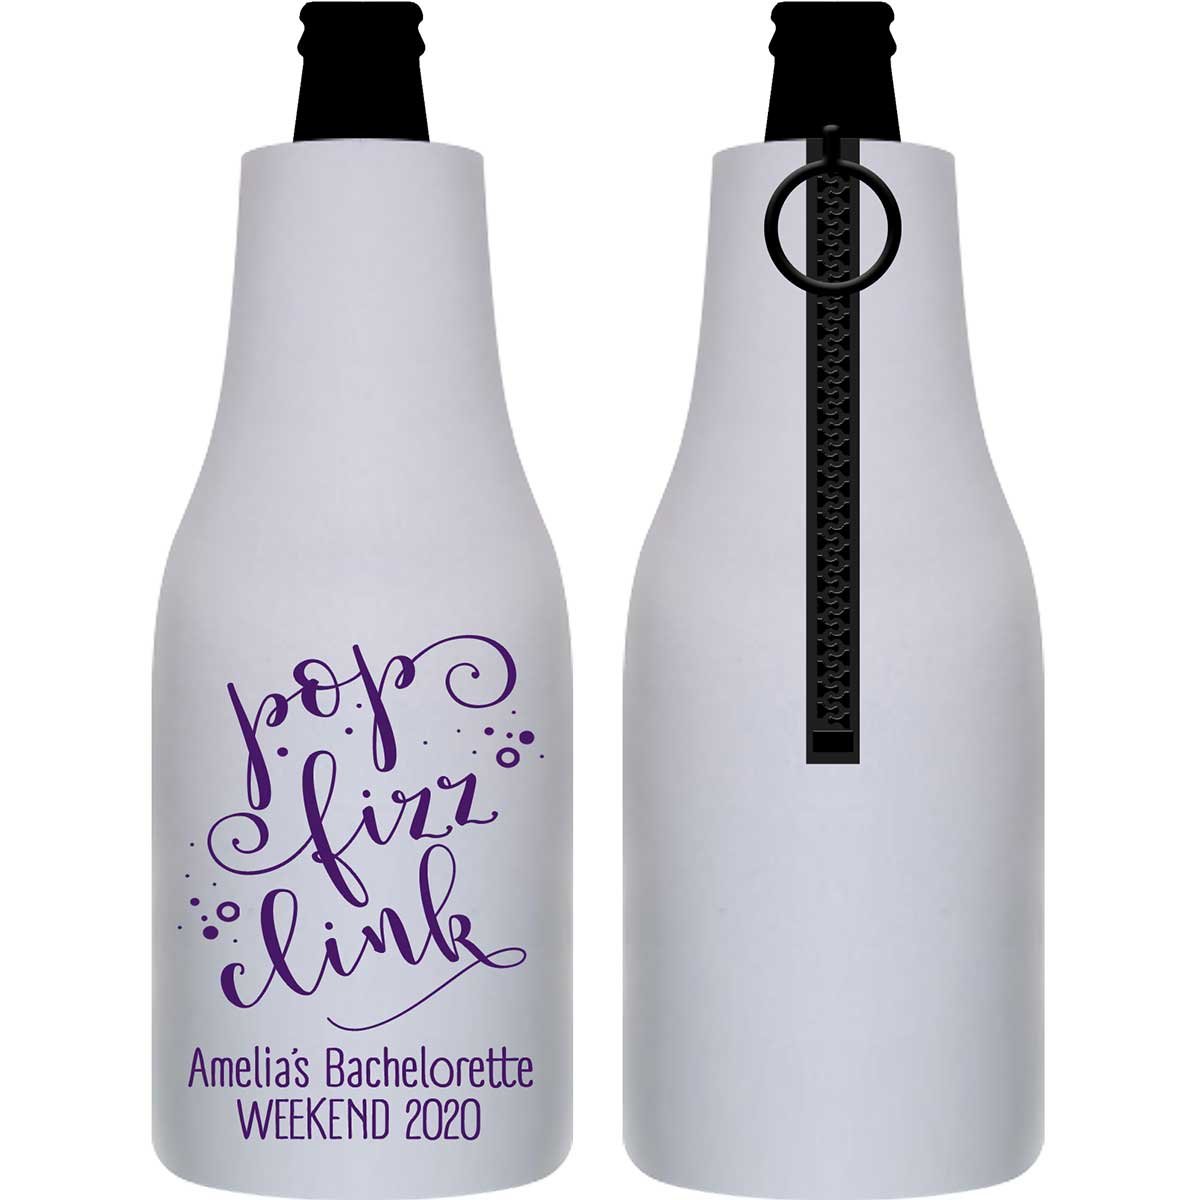 Pop Fizz Clink Bachelorette 1A Foldable Zippered Bottle Koozies Bachelorette Party Gifts for Guests